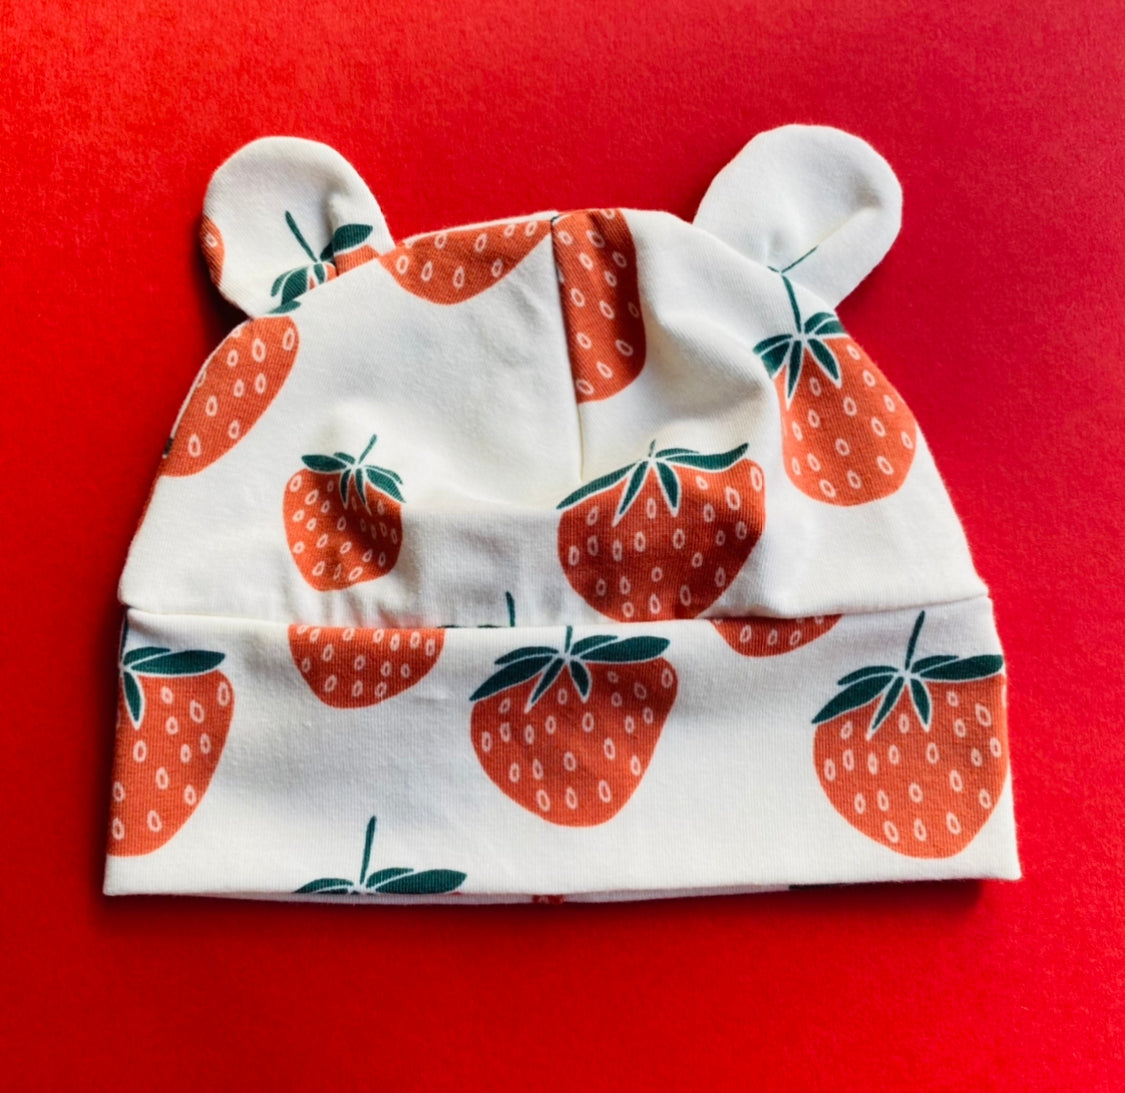 Eddie & Bee organic cotton Baby hat with ears  in Cream " Strawberry" print.